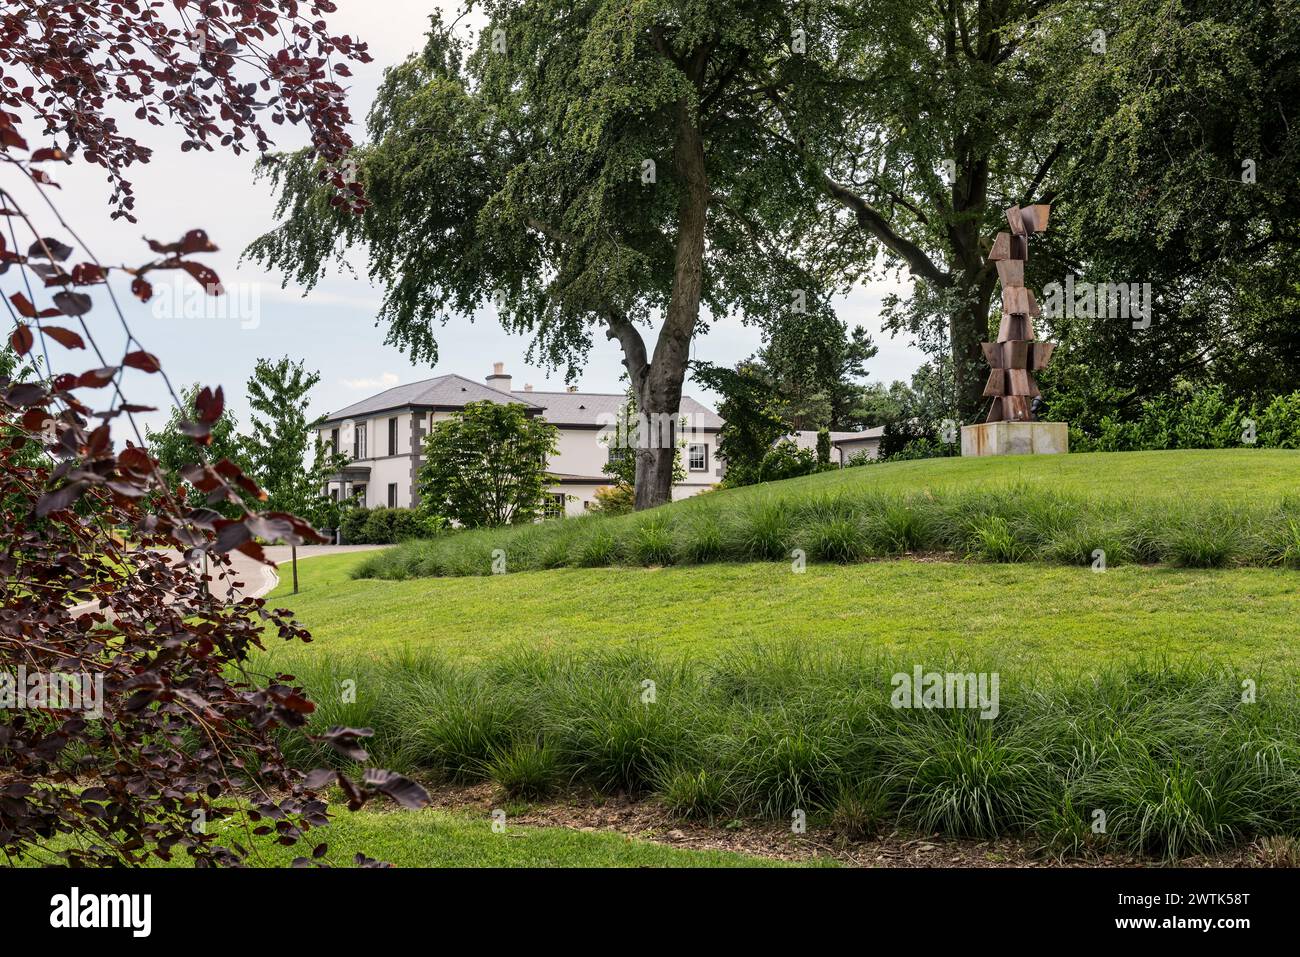 Terraced lawn and exterior of country house in Greystones, County Wicklow, Ireland Stock Photo